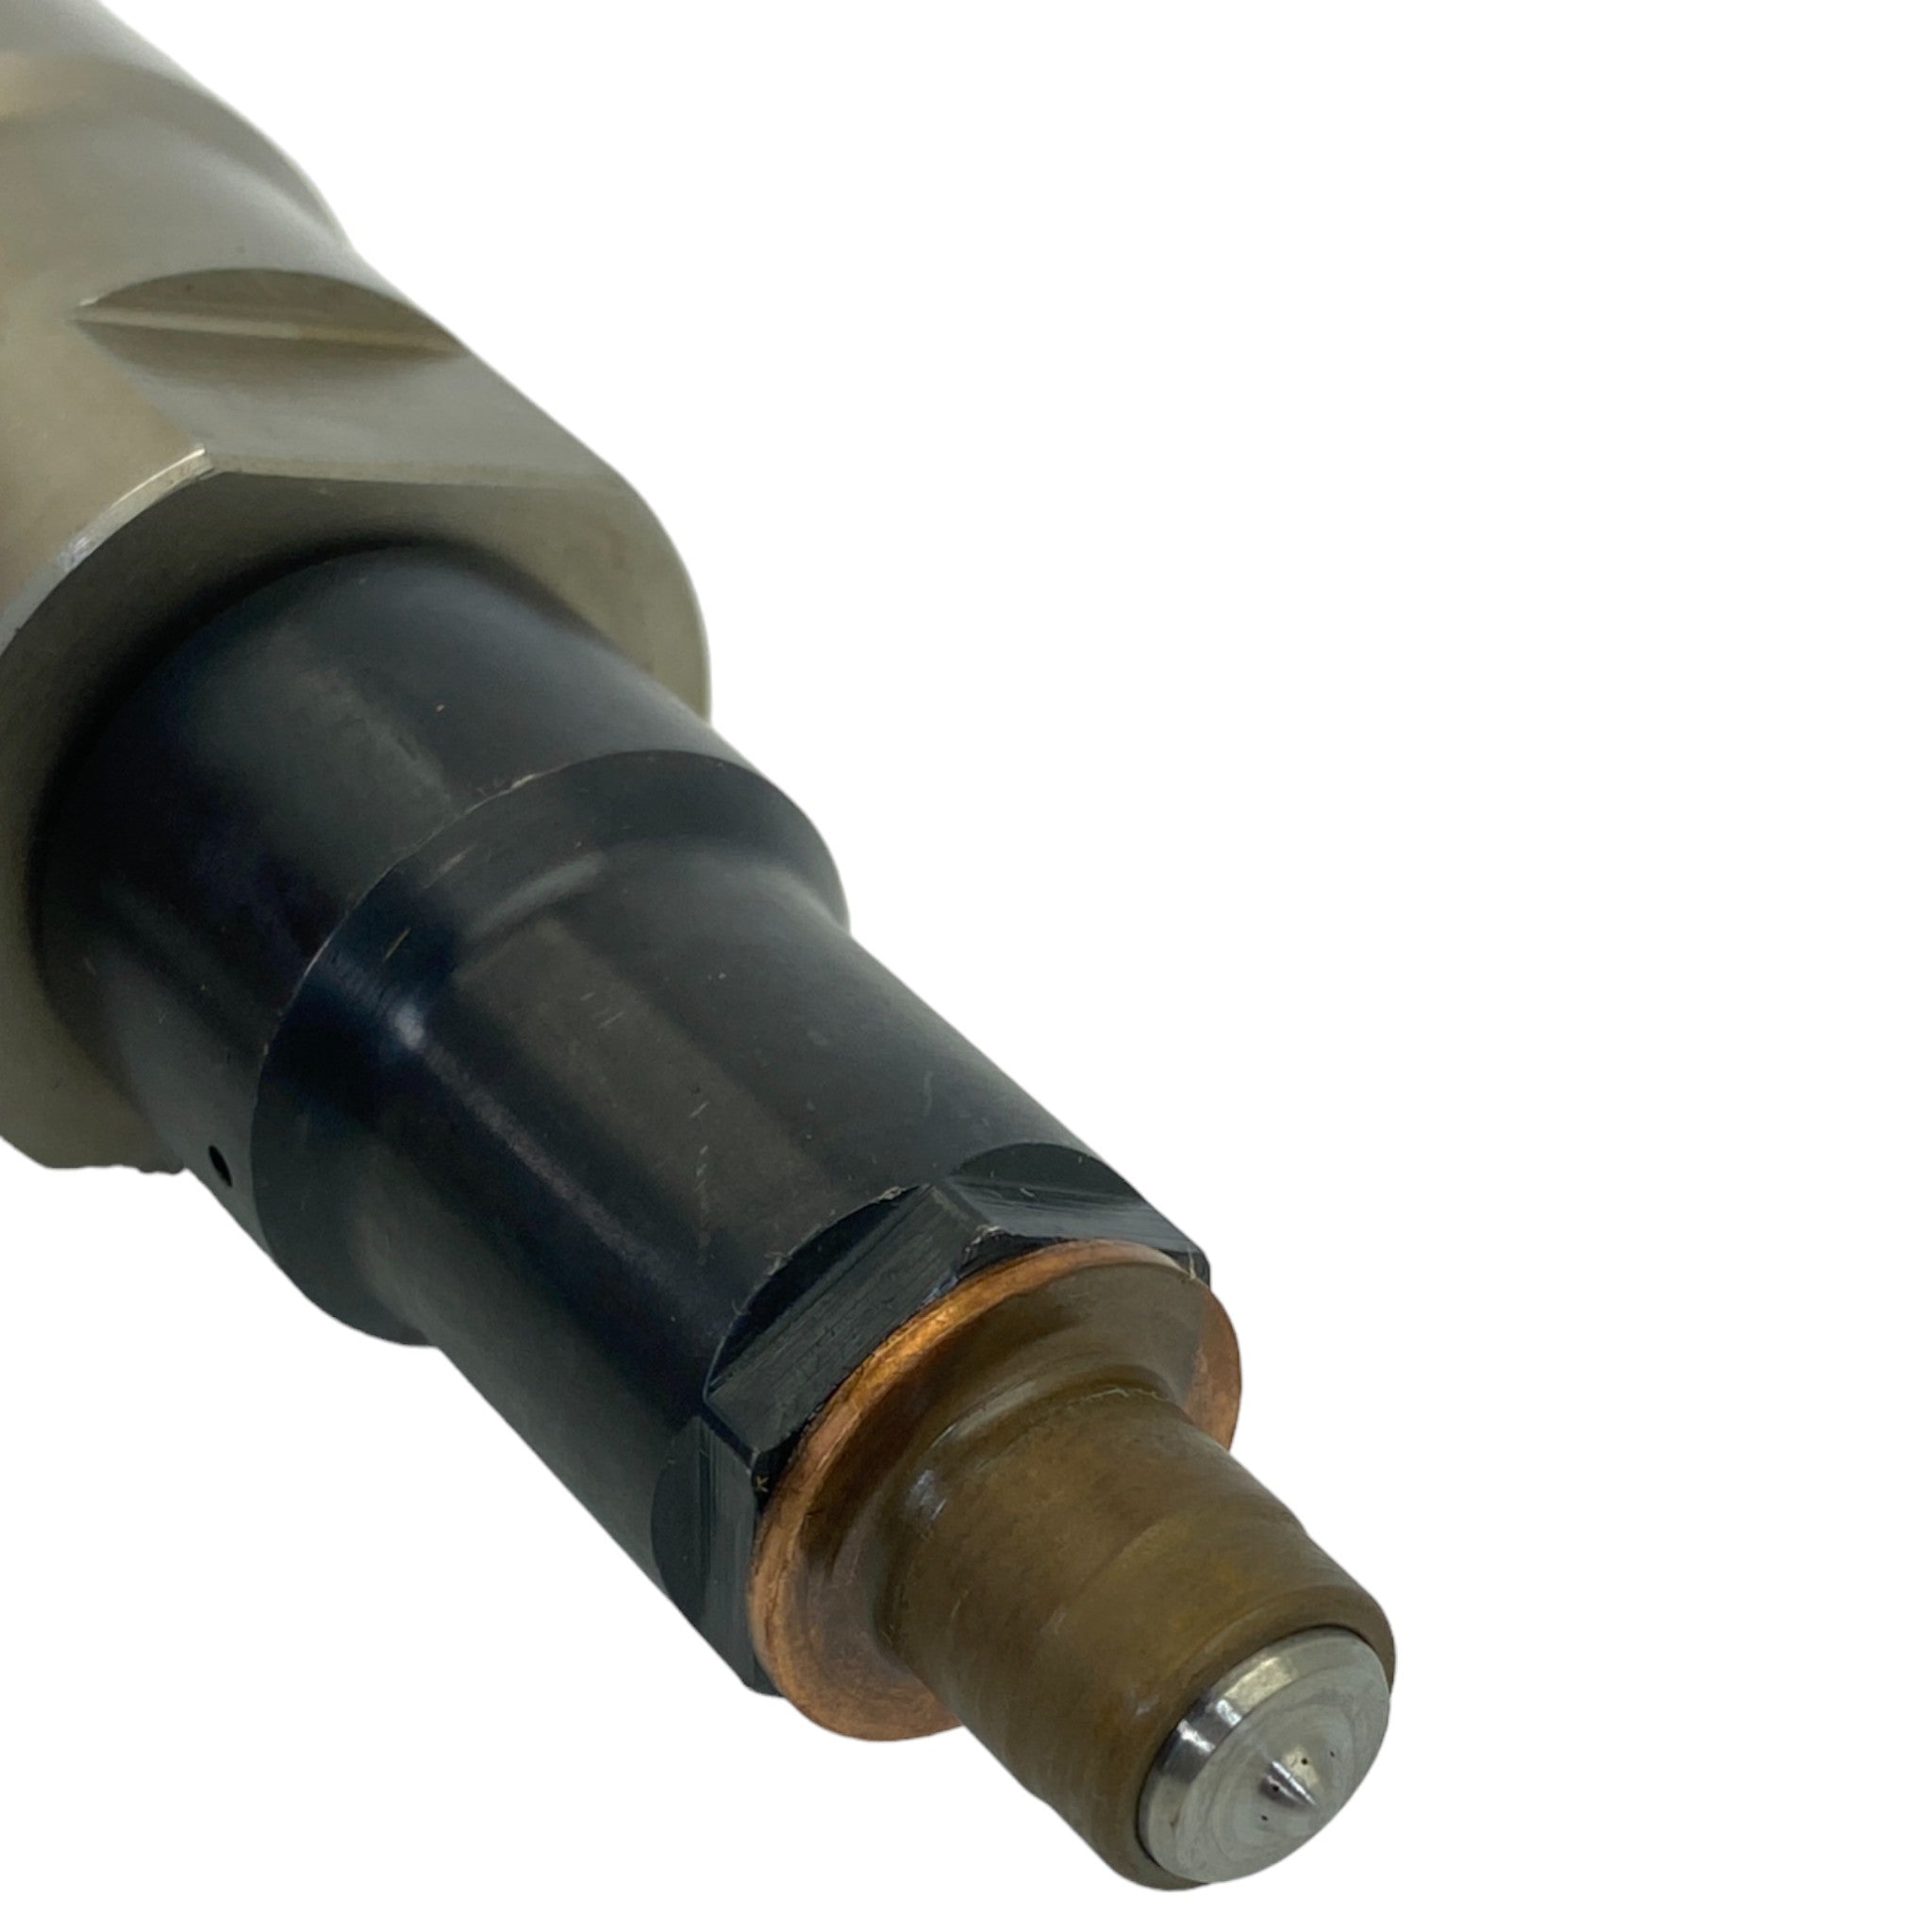 5579419 Oem Cummins Fuel Injector For Xpi Fuel Systems On Epa13 15L Isx/Qsx Engines